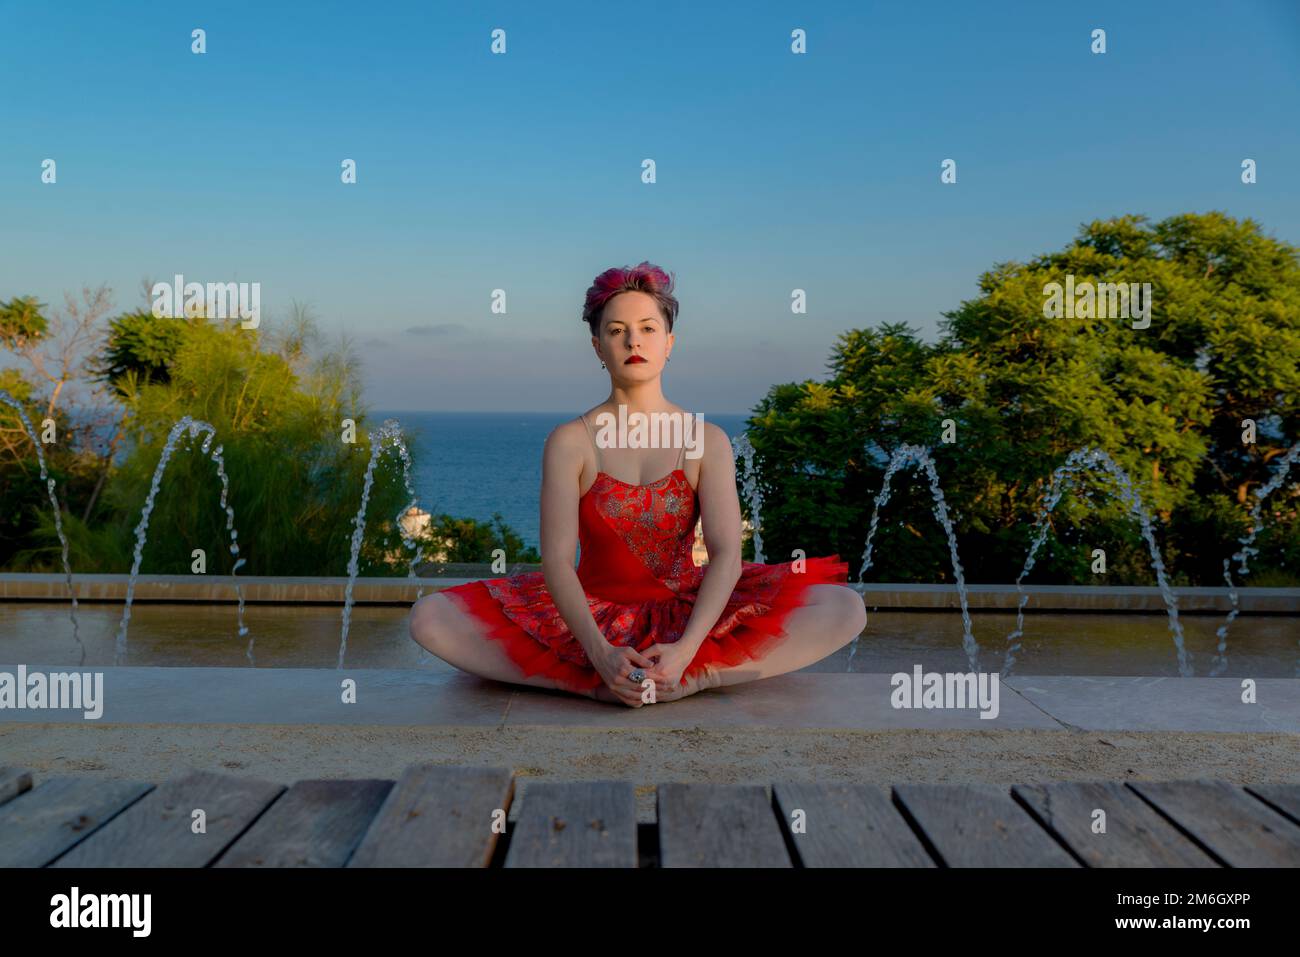 young ballet dancer girl with red outfit outdoors Stock Photo